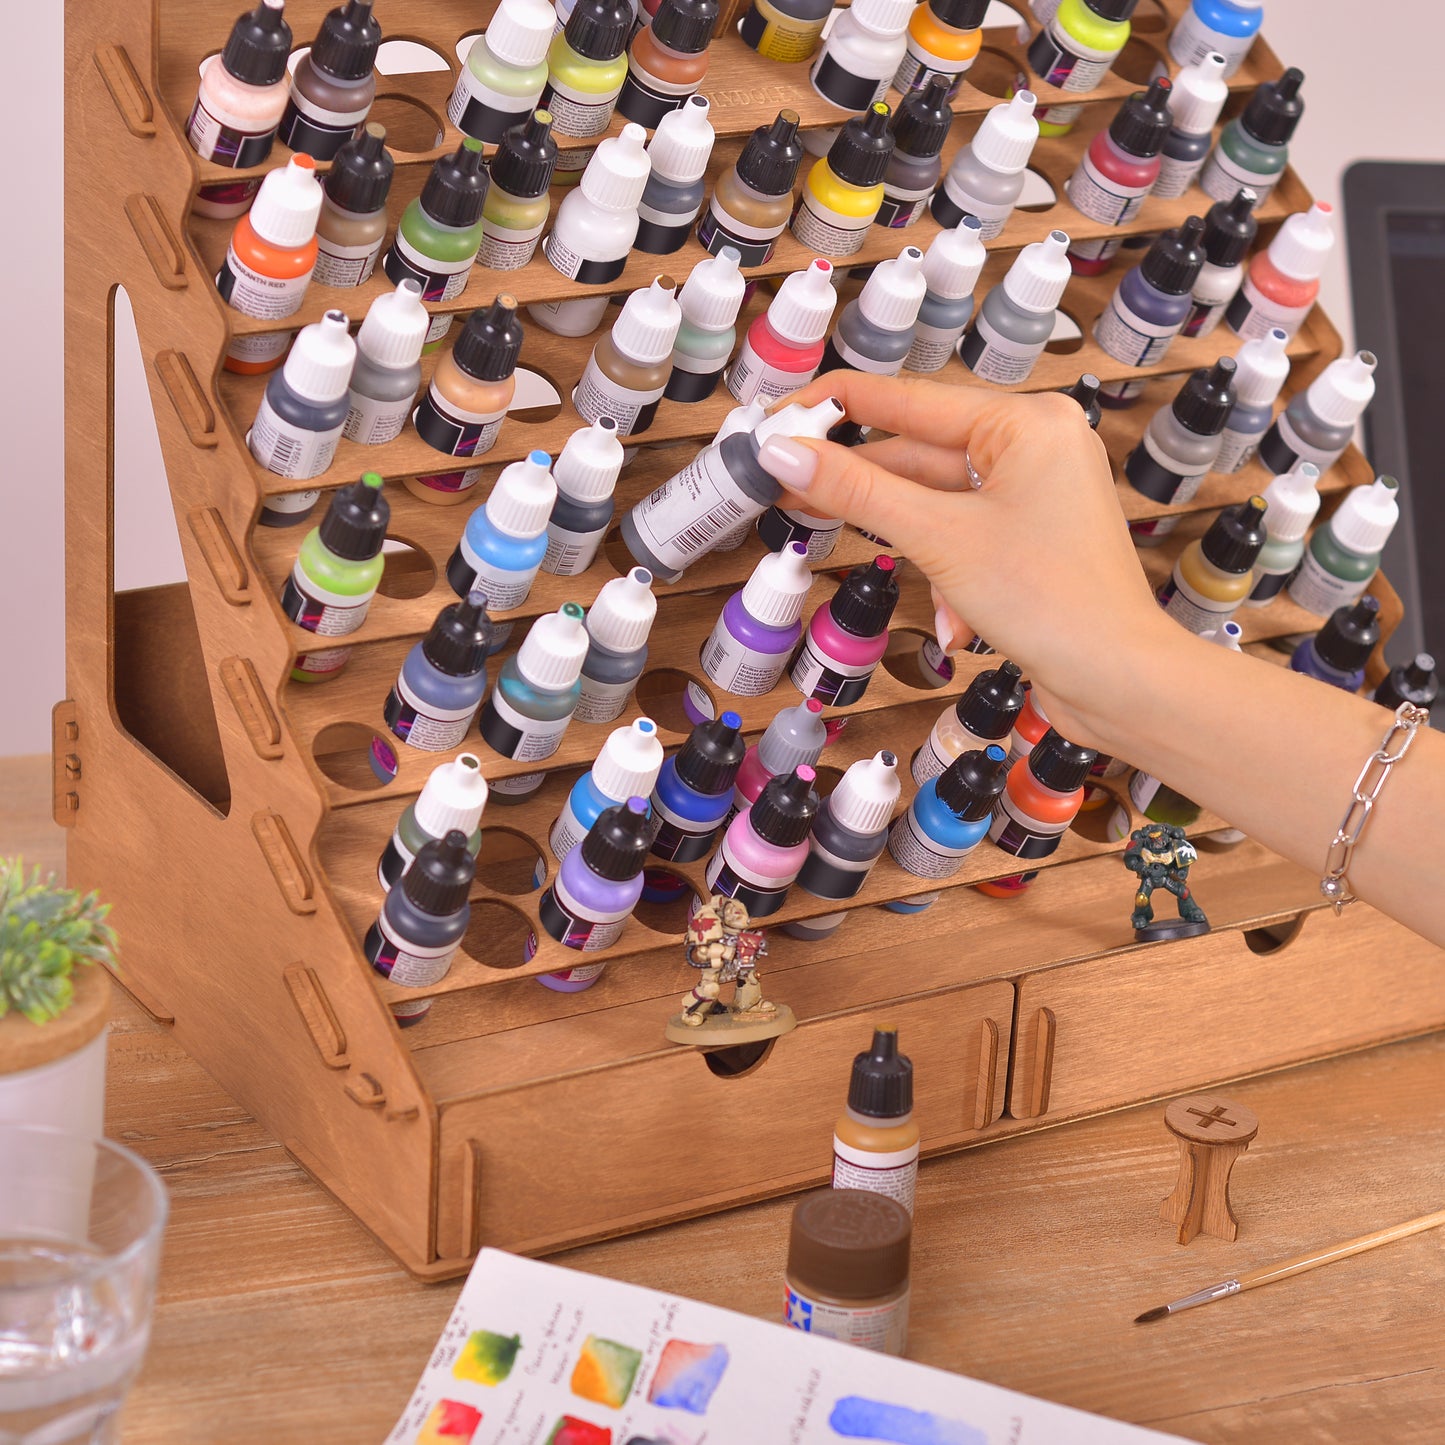 PLYDOLEX Citadel Paint Organizer for 87 Paint Bottles and 14 Brushes 